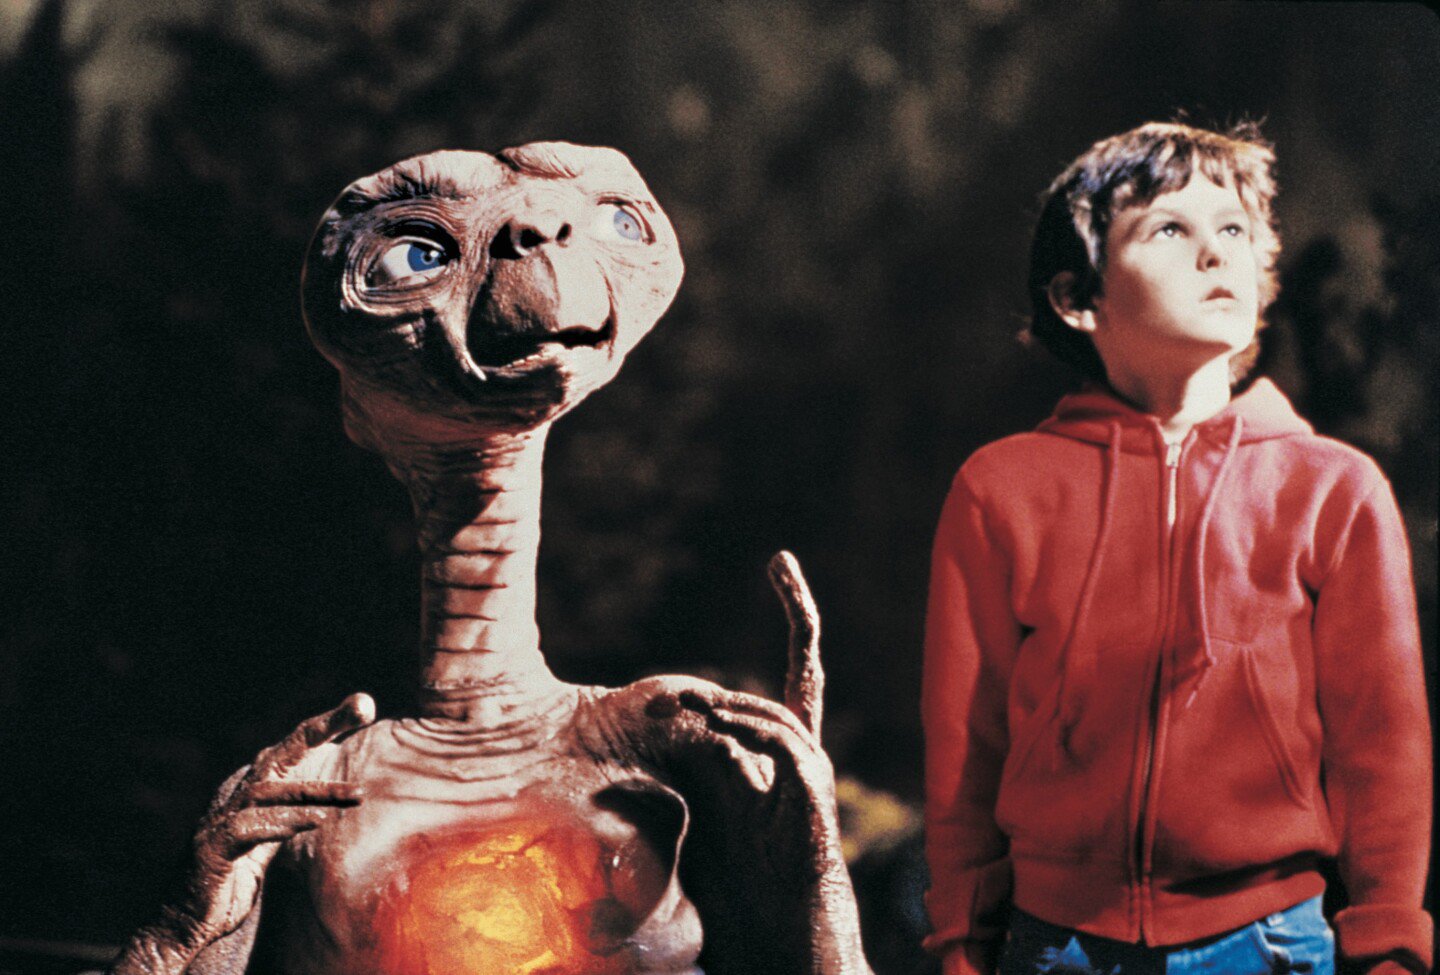 Philharmonia at the Movies: E.T. the Extra-Terrestrial